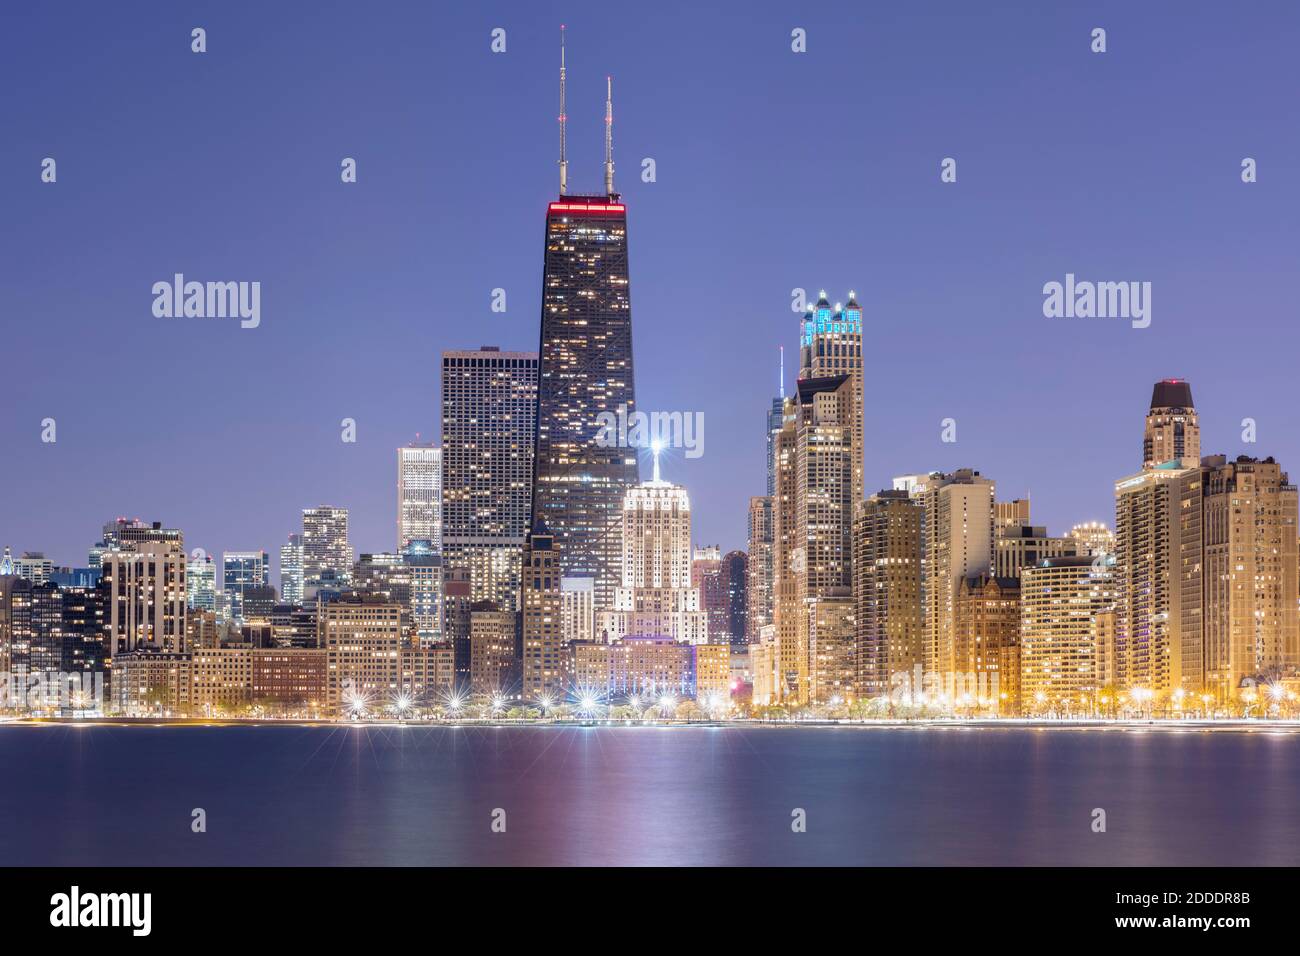 Illuminated view of 875 North Michigan Avenue (John Hancock Center) surrounded by skyscrapers at dusk, Chicago, USA Stock Photo